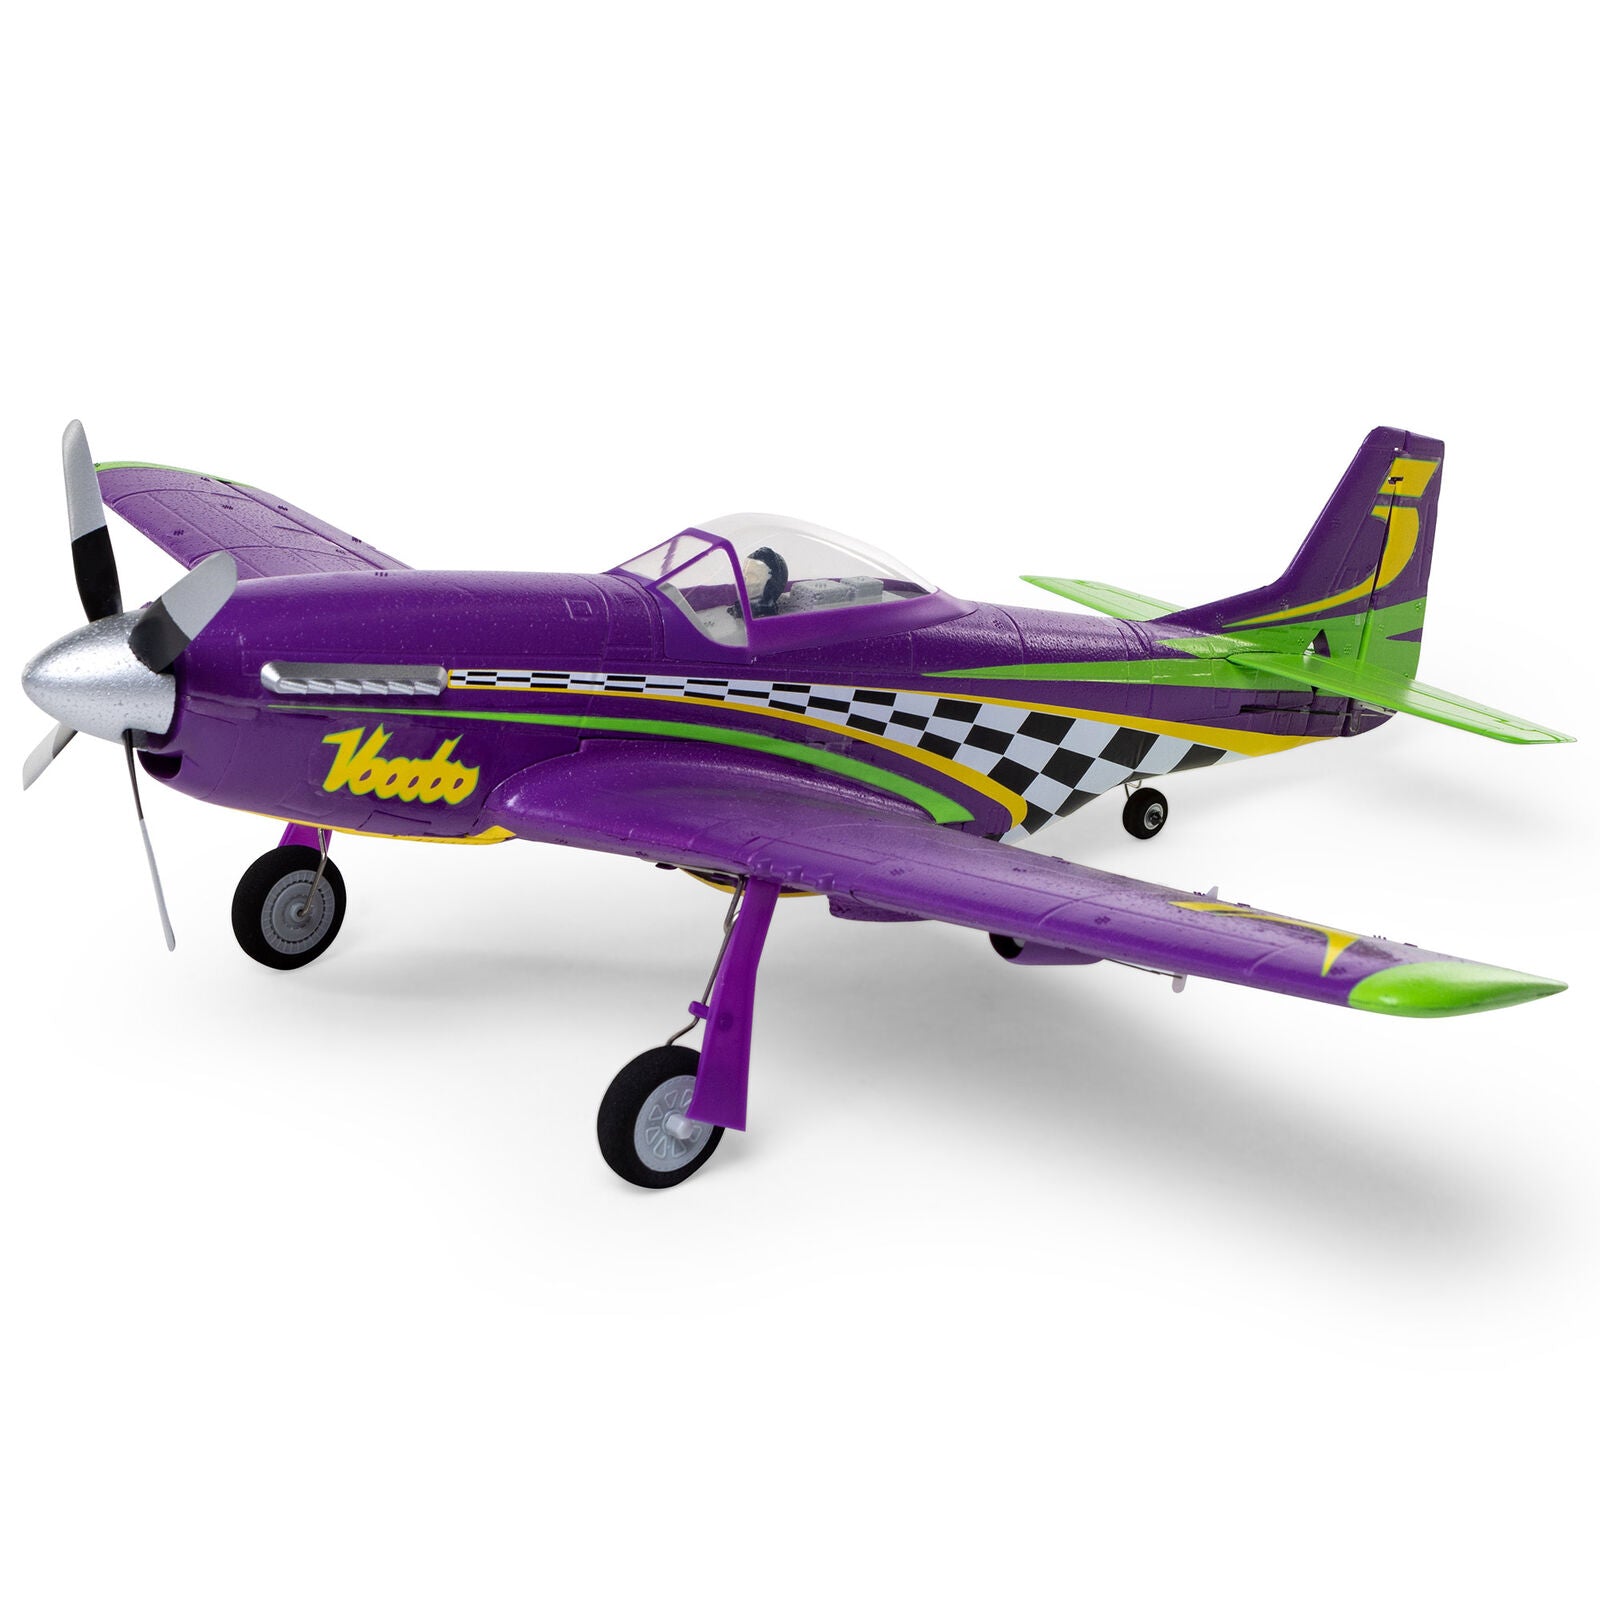 EFLITE EFLU4350 UMX P-51D Voodoo BNF Basic with AS3X and SAFE Select